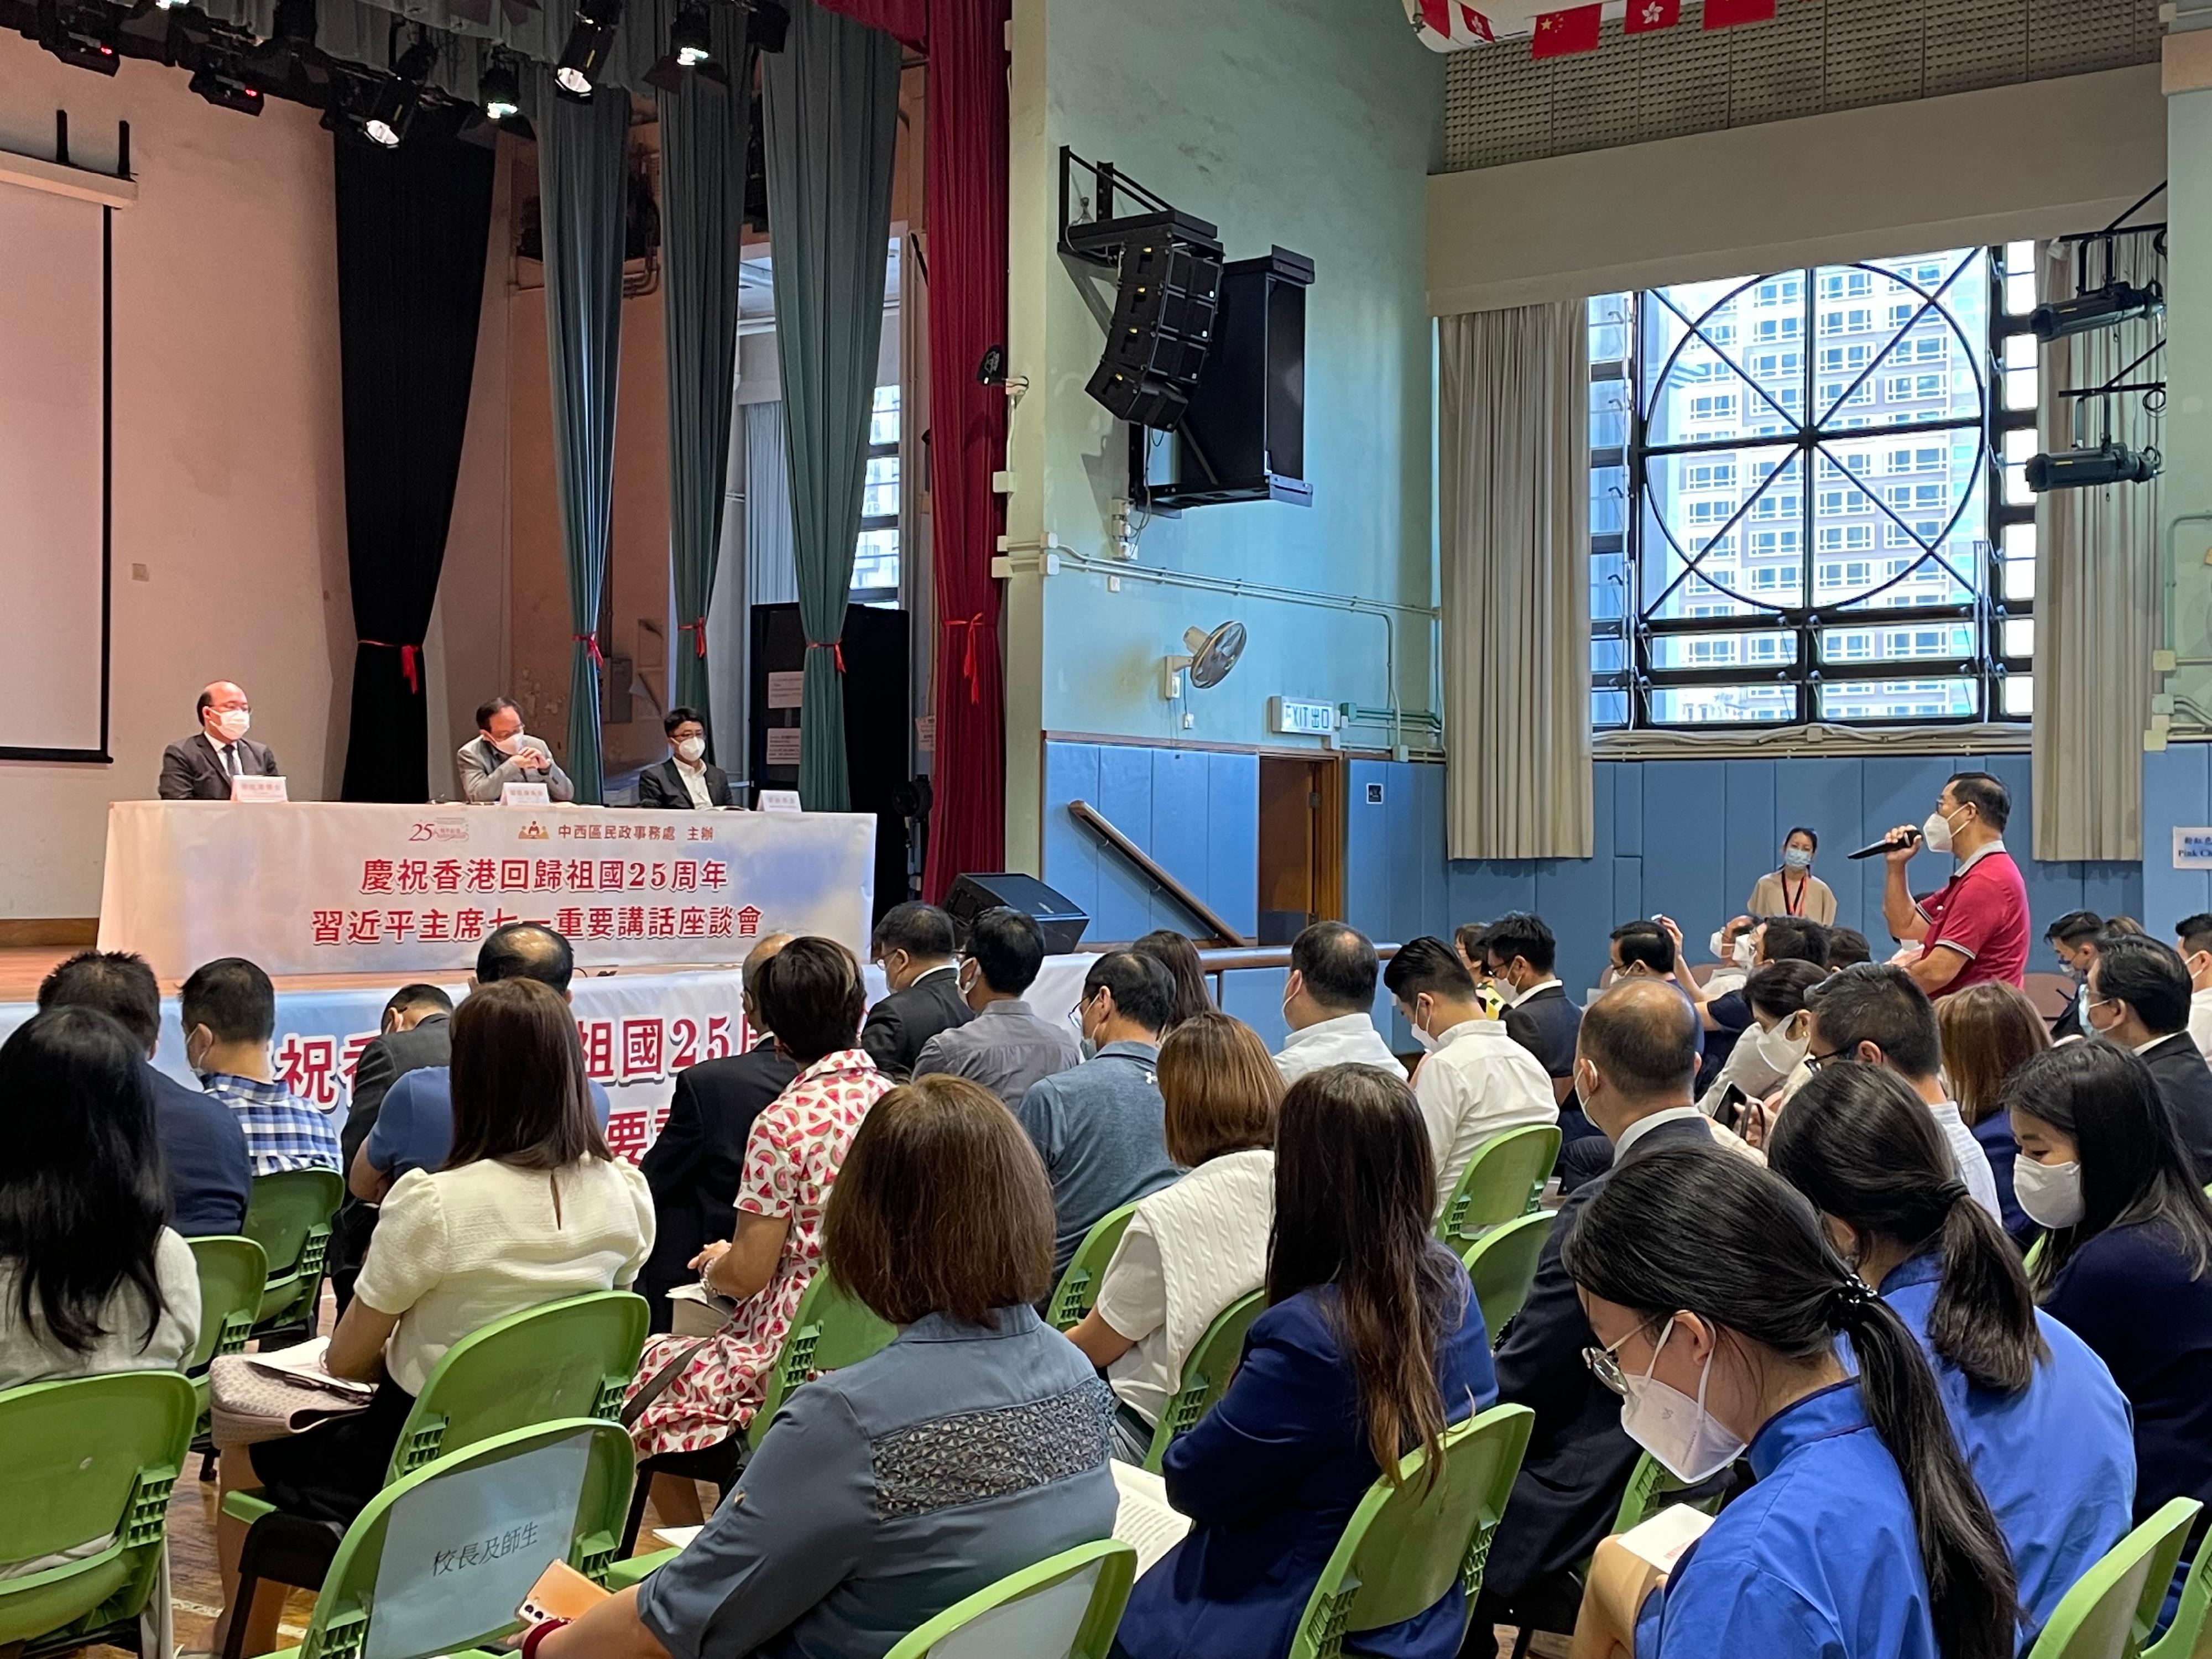 The Central and Western District Office yesterday (July 21) held the "Session to Learn About the Spirit of President Xi's Important Speech" at Sai Ying Pun Community Complex. Photo shows Hong Kong Deputy to the National People's Congress Mr Ip Kwok-him (centre); Member of the Legislative Council and the Associate Director of the China Economic Research Programme of Lingnan University, Dr Chow Man-kong (left); and the Deputy Director General of the Hong Kong Island Sub-office of the Liaison Office of the Central People's Government in the Hong Kong Special Administrative Region, Mr Wang Hui (right), listening to participants' questions attentively.